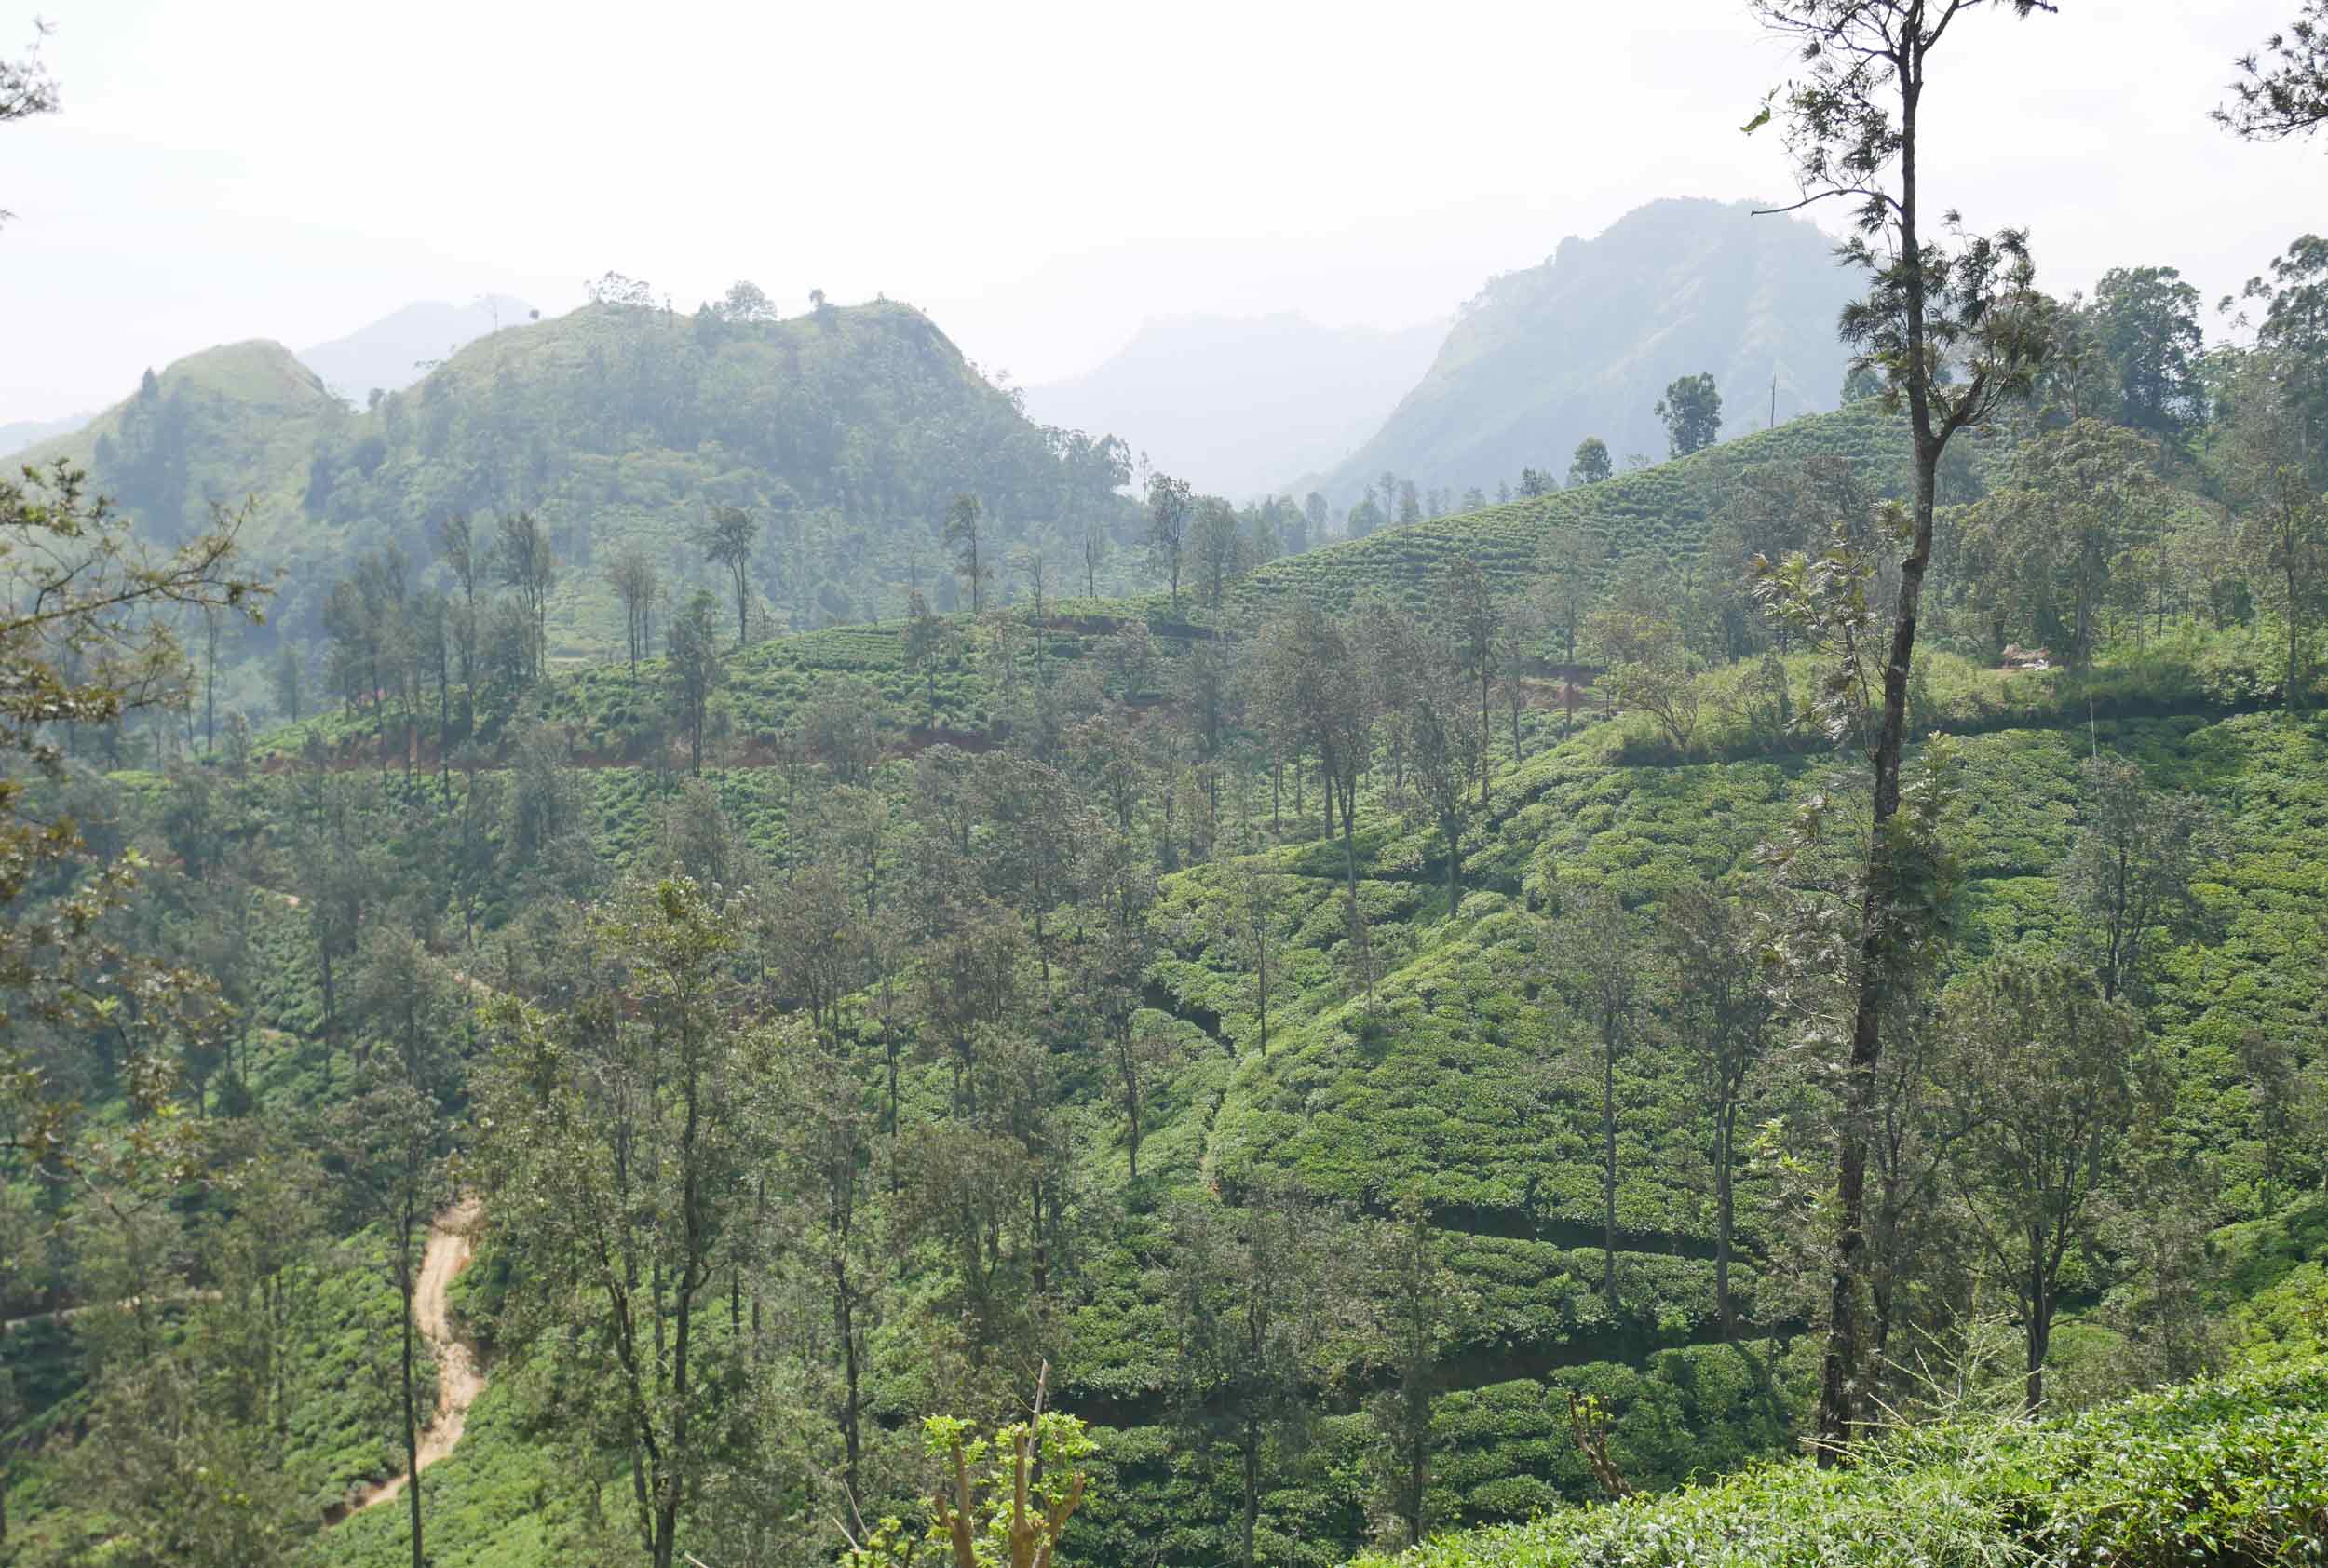  The picturesque tea fields of Sri Lanka are not to be missed! 